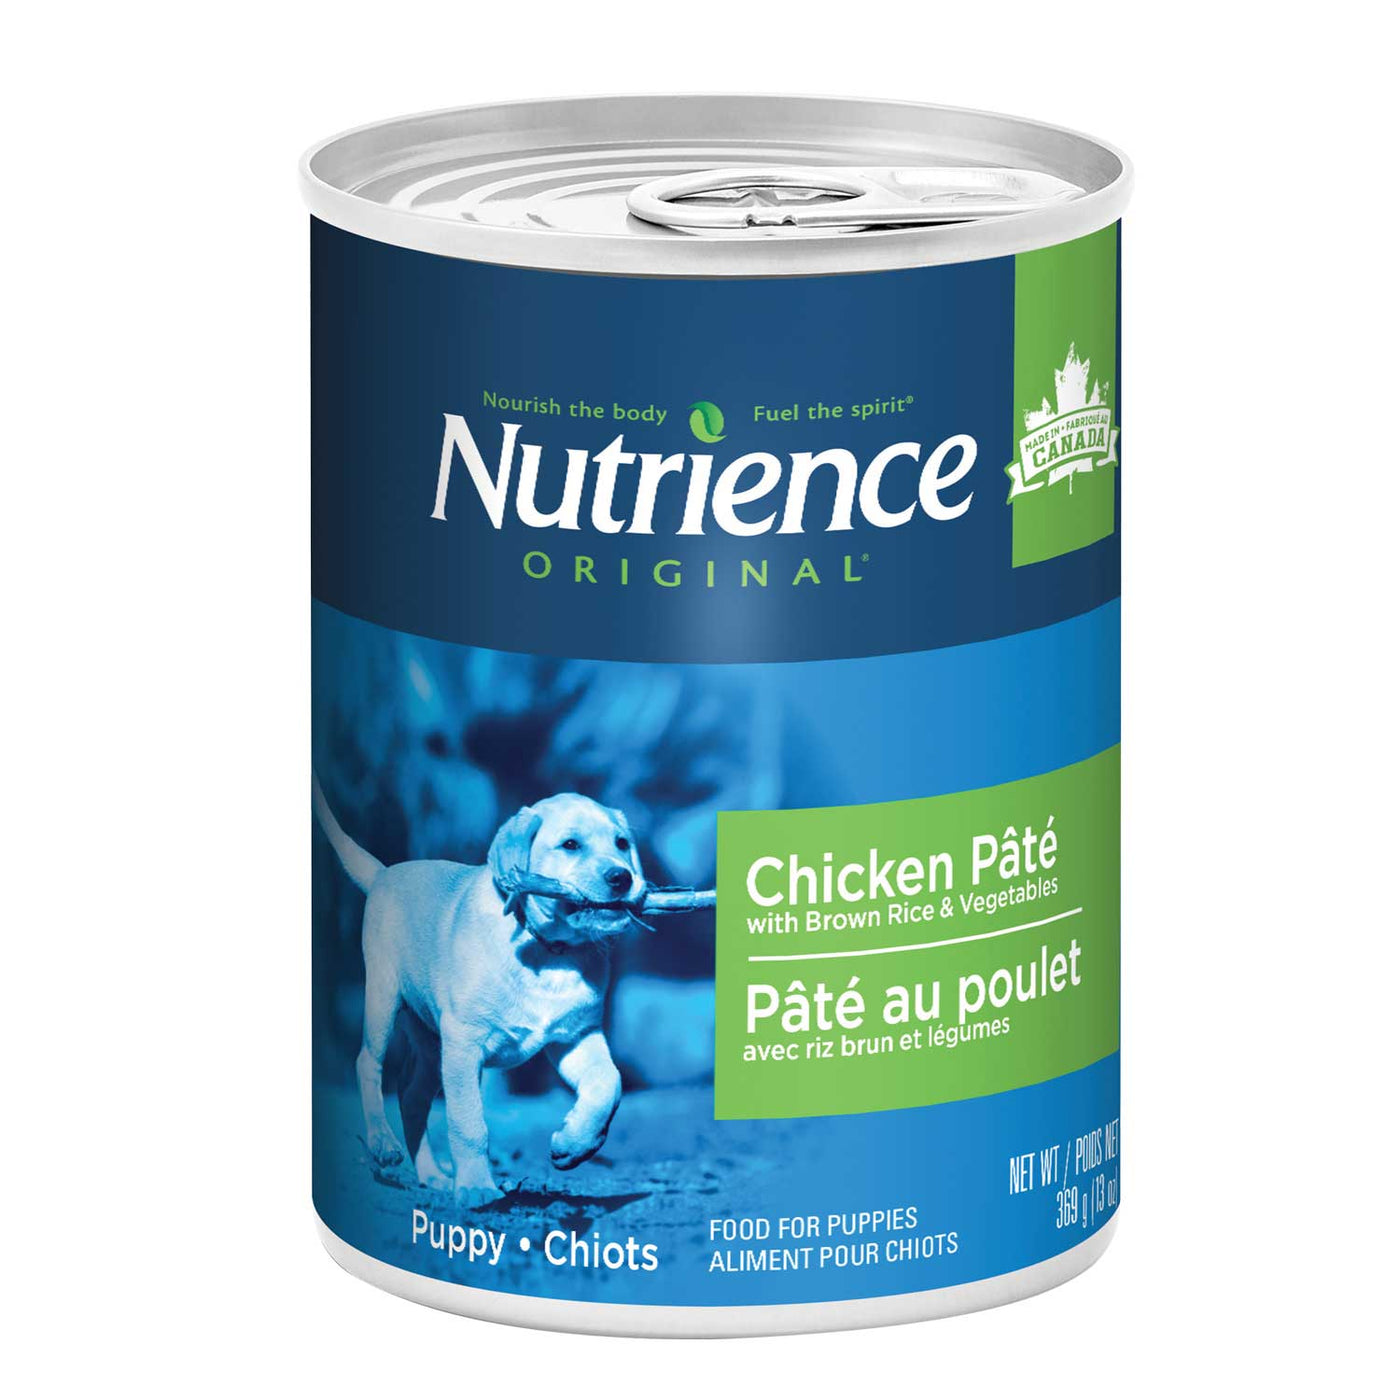 Original Chicken Pâté with Brown Rice & Vegetables for Puppies - Wet Dog Food - Nutrience